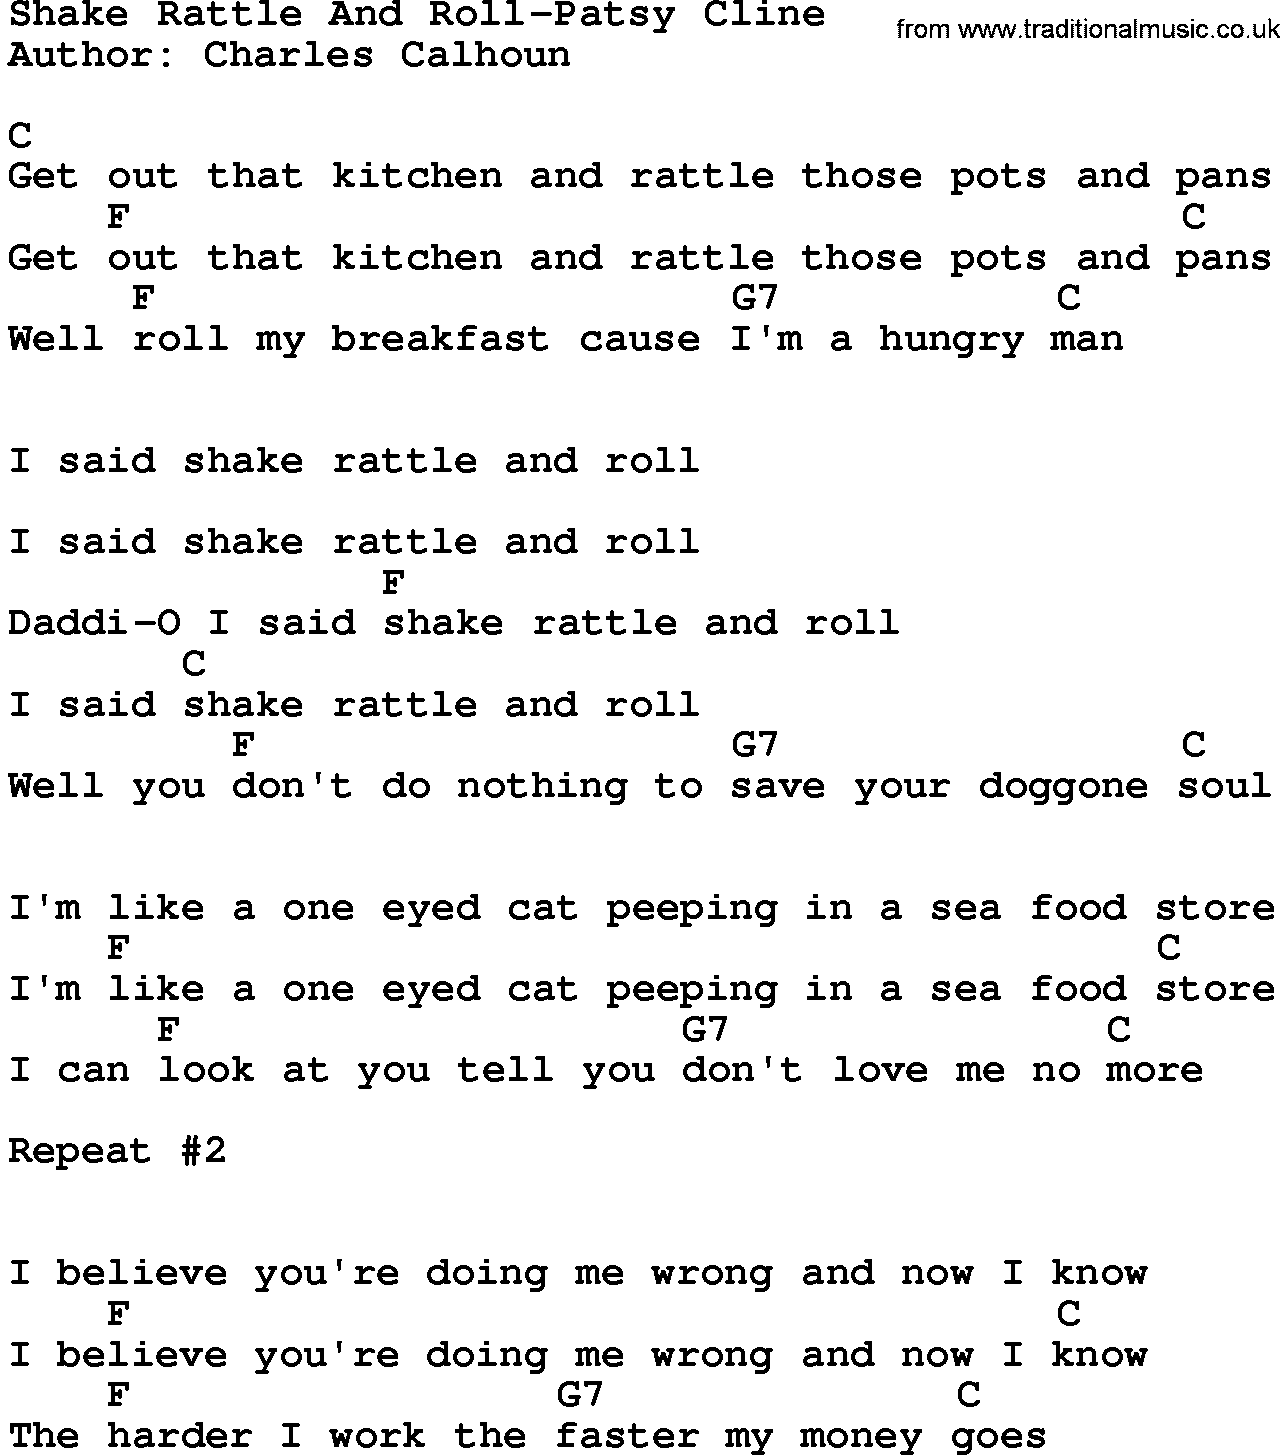 Country music song: Shake Rattle And Roll-Patsy Cline lyrics and chords